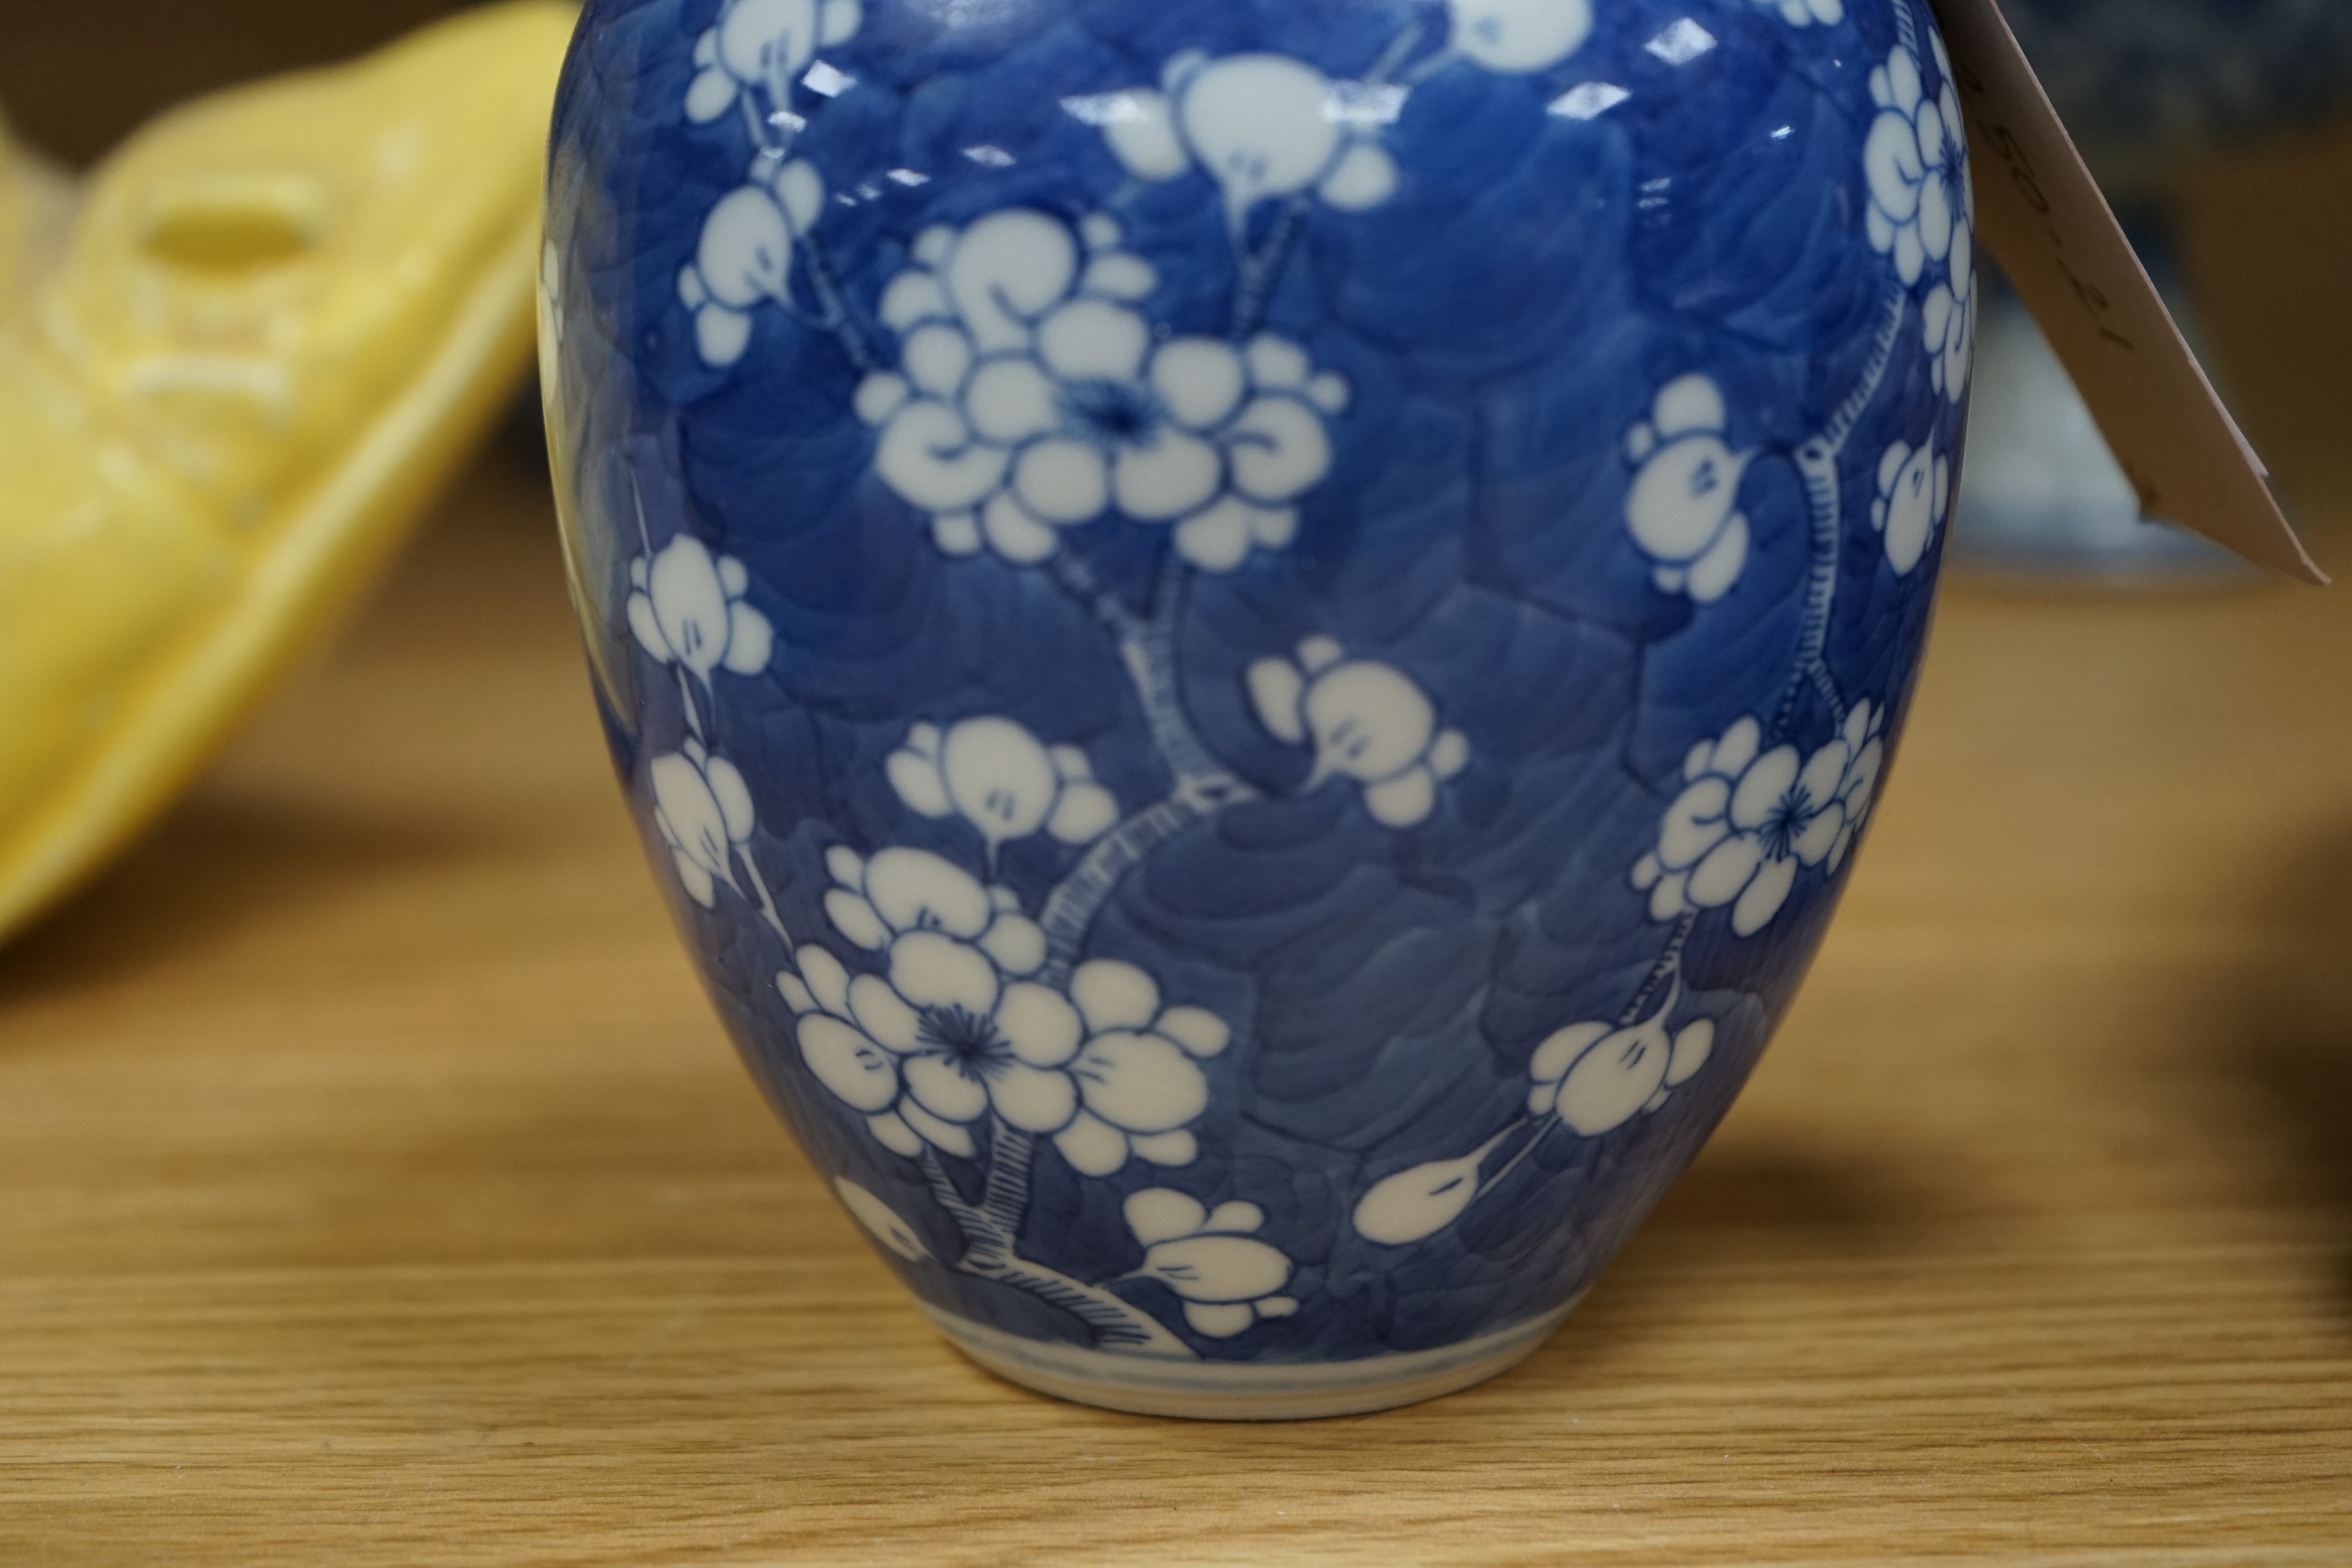 A Chinese blue and white ovoid jar and cover and similar stacking box, Kangxi and a Qing blue and white footed cup, tallest 15cm